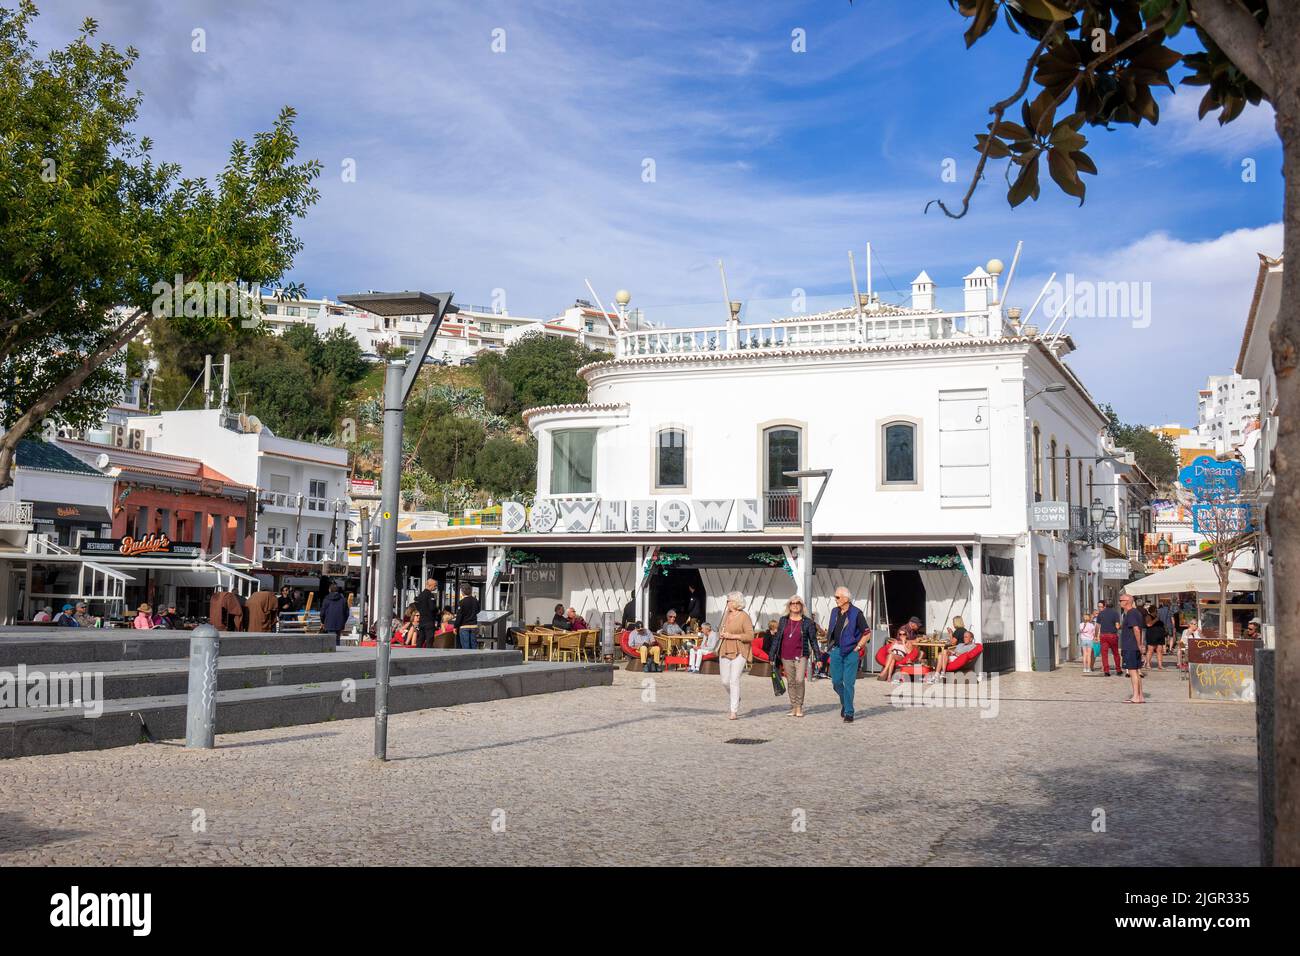 Albufeira Old Town Square The Algarve Portugal Winter 2018 People Eat Outdoors At Down Town Pizza And Pasta Restaurant Stock Photo